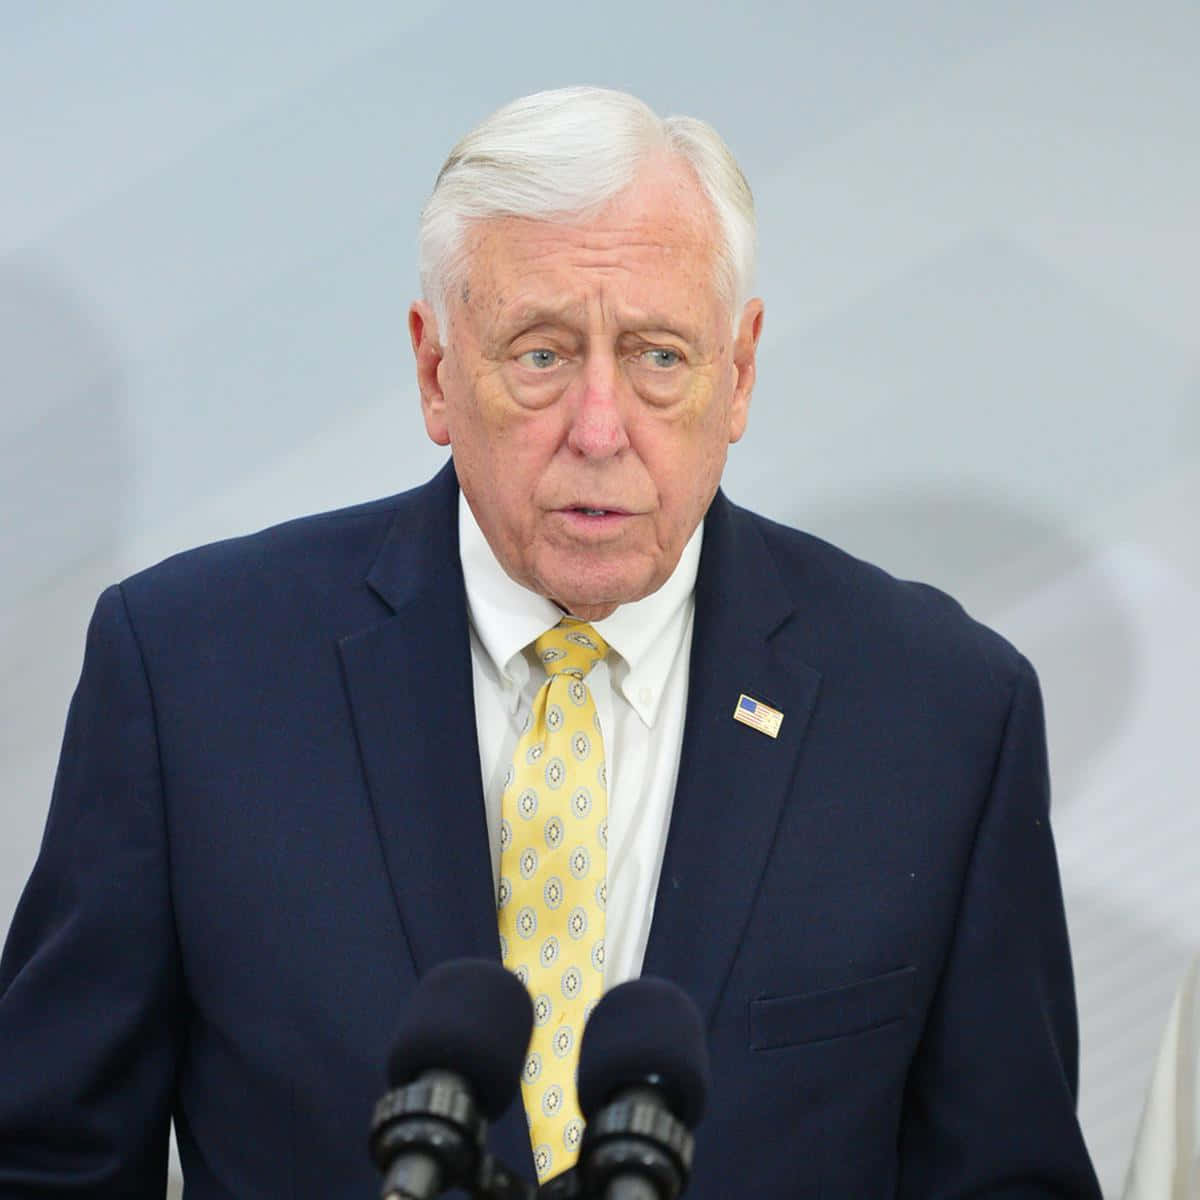 Steny Hoyer In Front Of Microphone Wallpaper